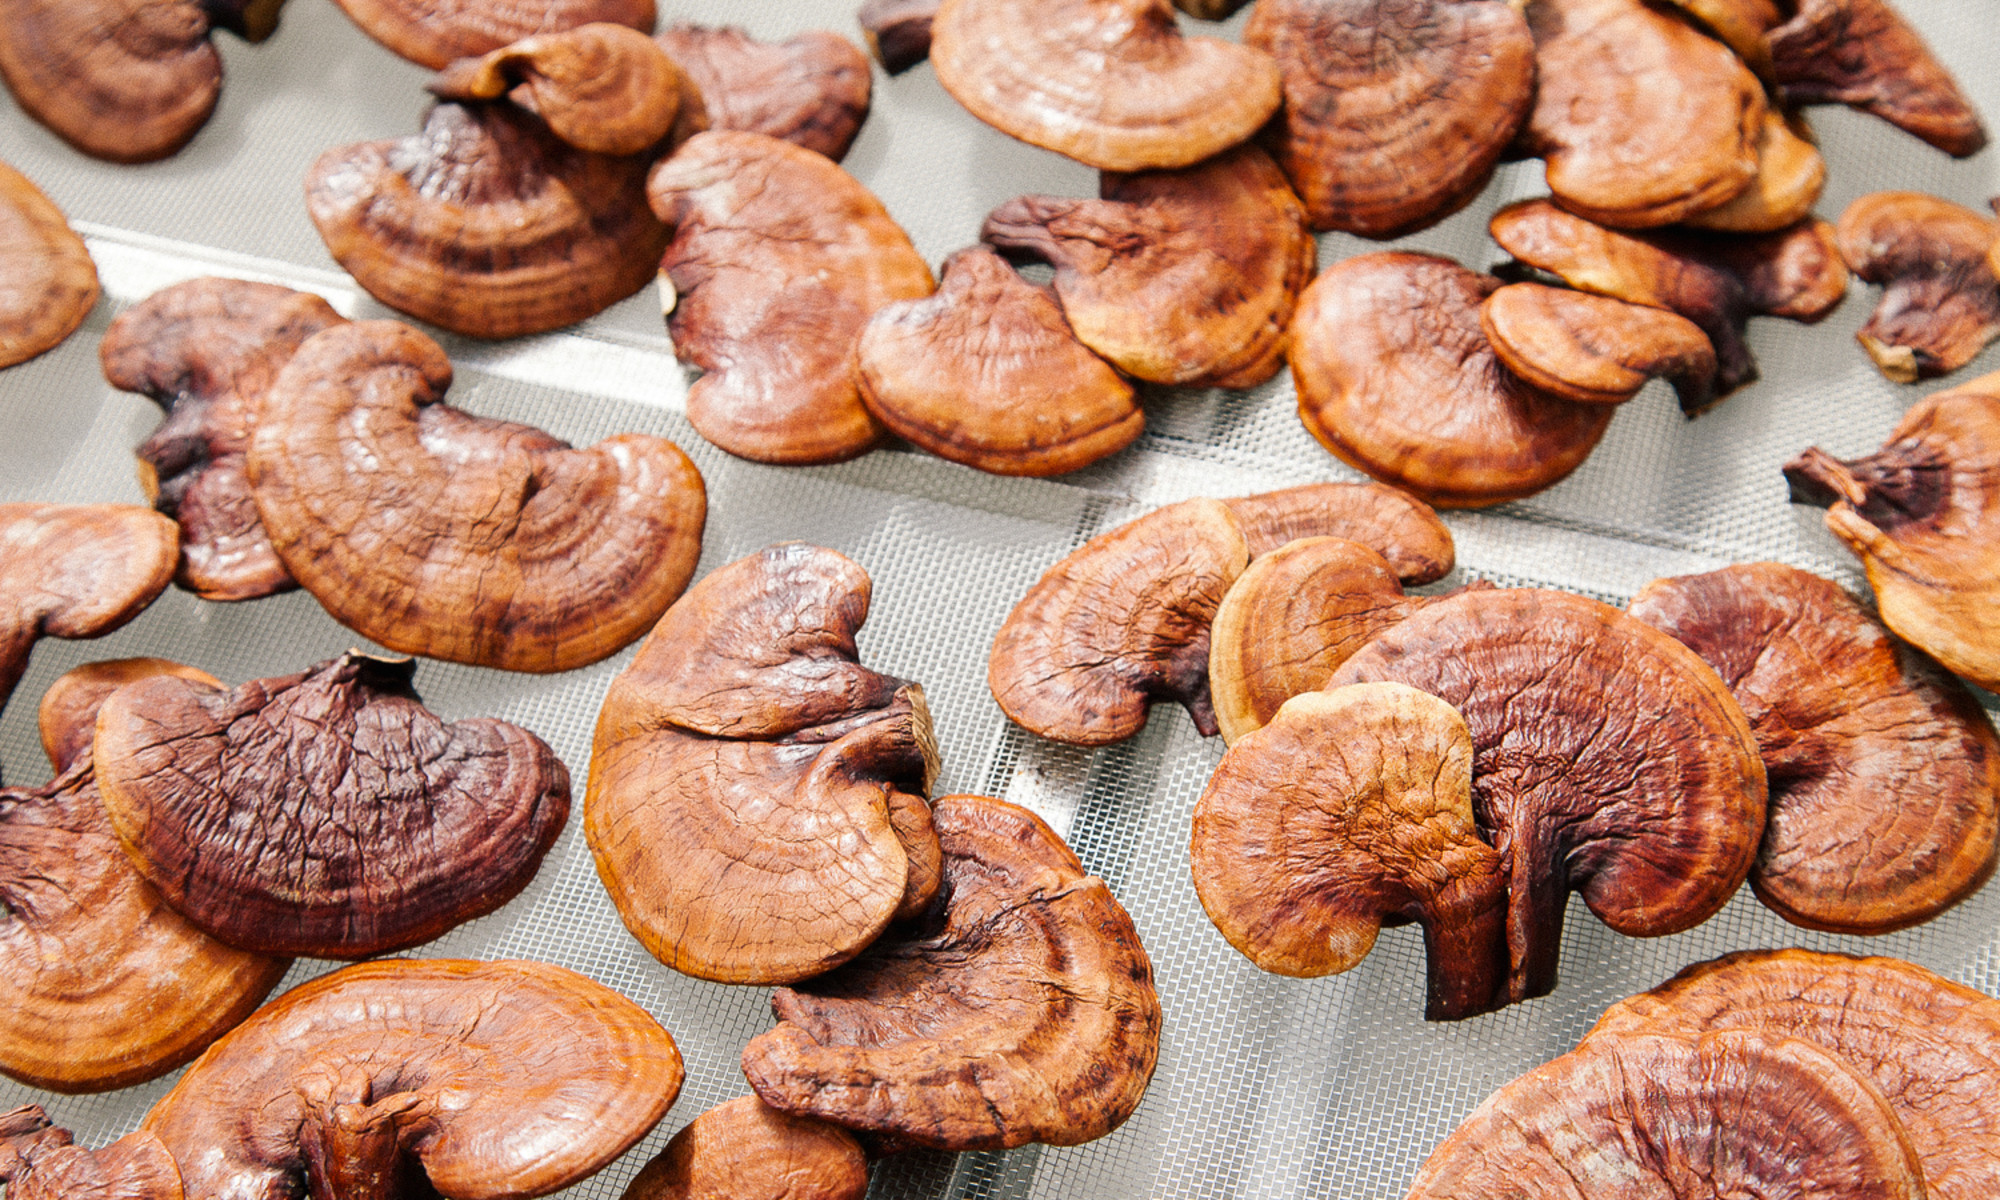 What Are the Modern Applications of Reishi Mushrooms in Wellness?